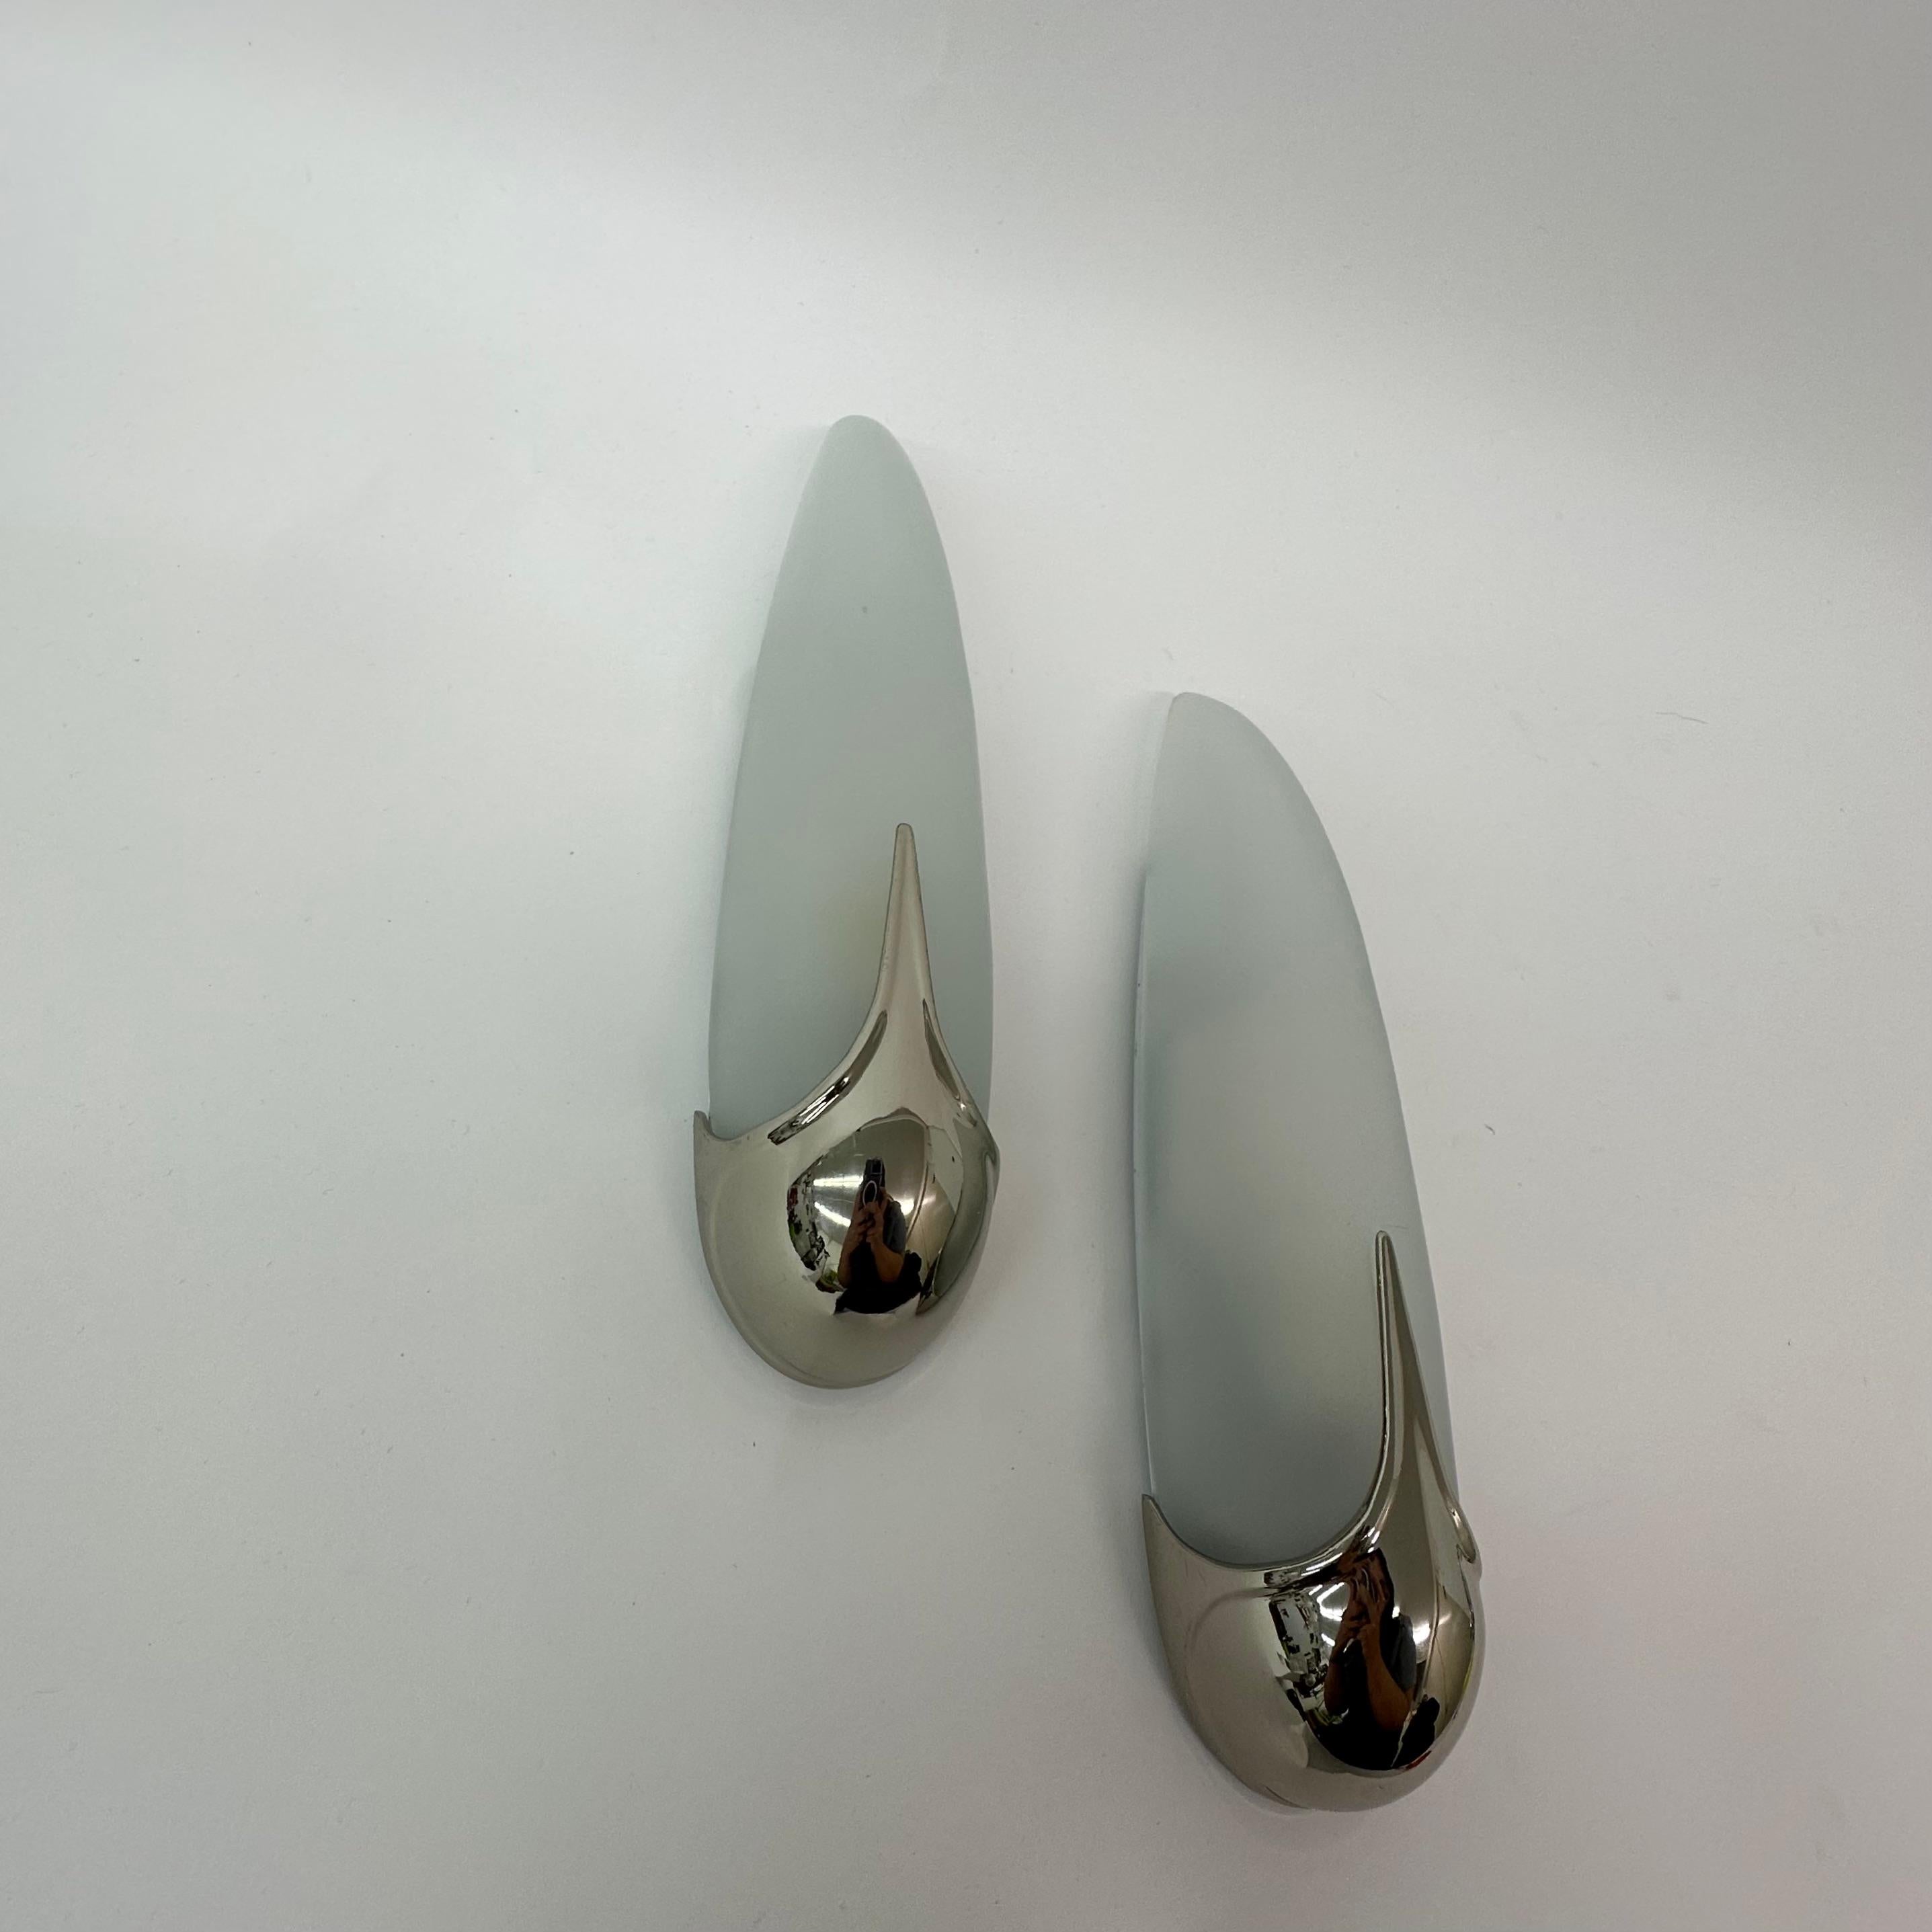 Pair of Idearte Sconces Wall Lamps, Spain, 1980s For Sale 4